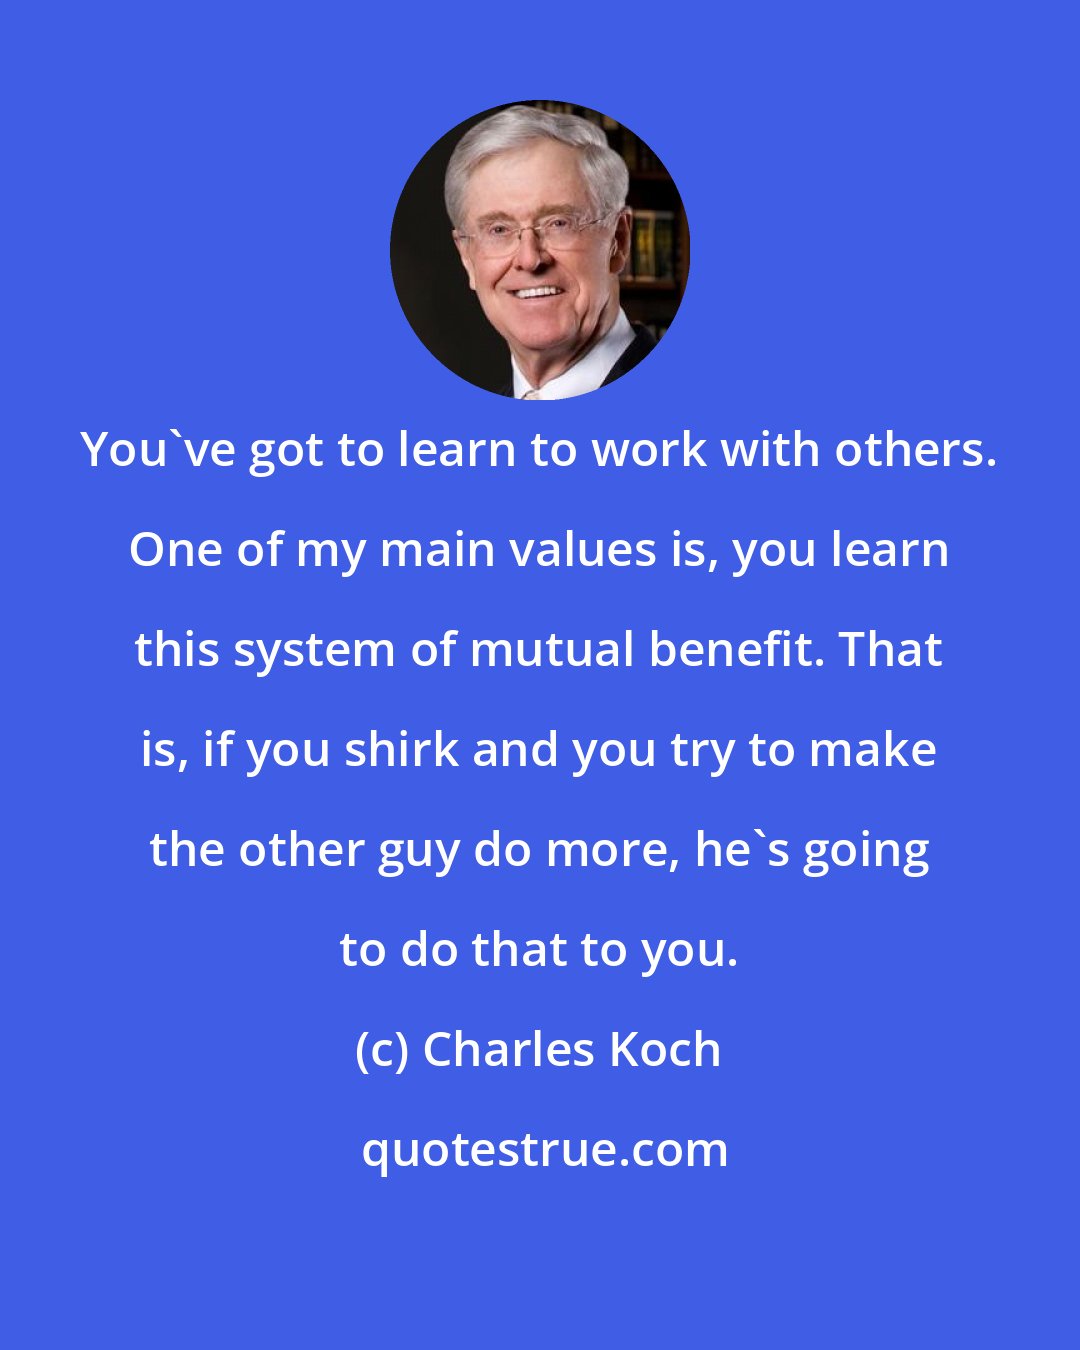 Charles Koch: You've got to learn to work with others. One of my main values is, you learn this system of mutual benefit. That is, if you shirk and you try to make the other guy do more, he's going to do that to you.